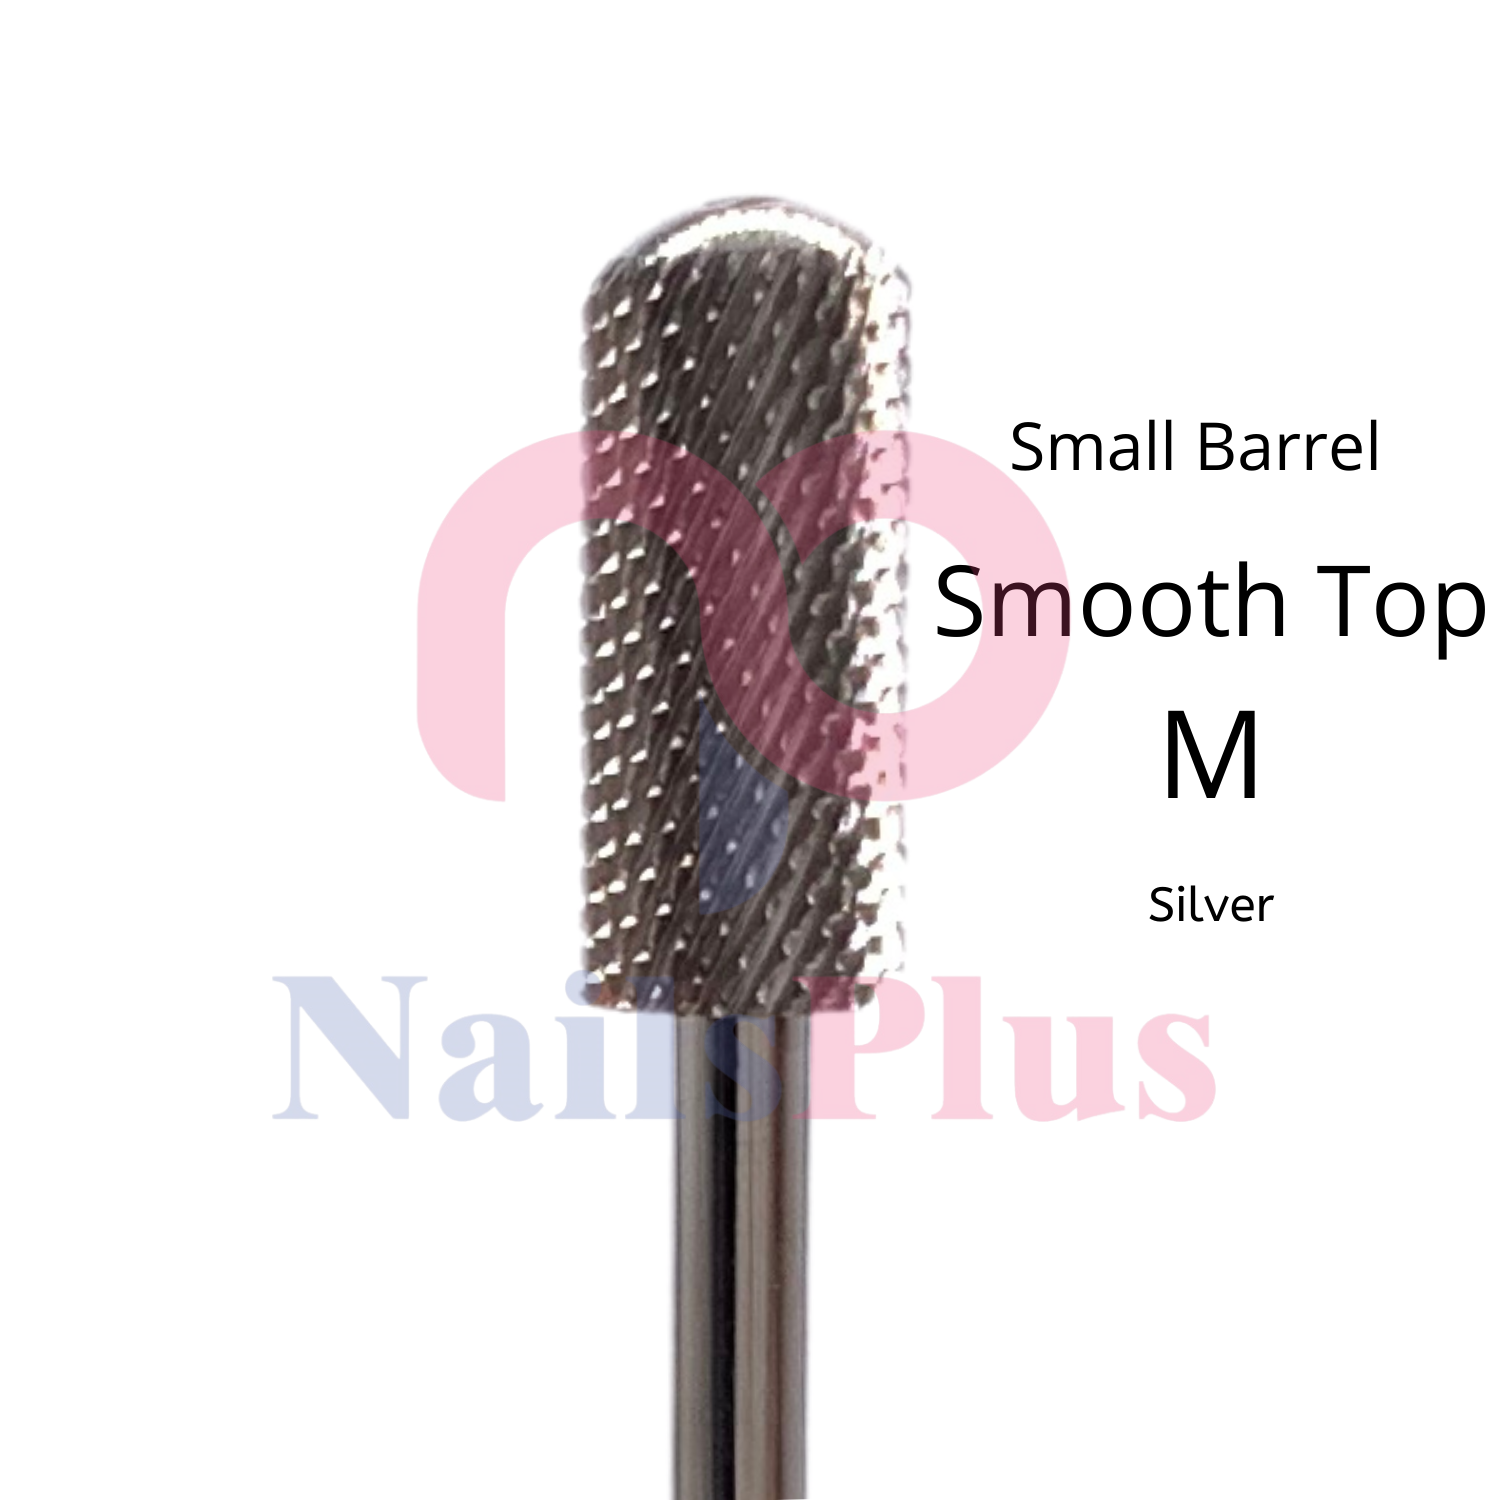 Small Barrel - Smooth Top - M - Silver